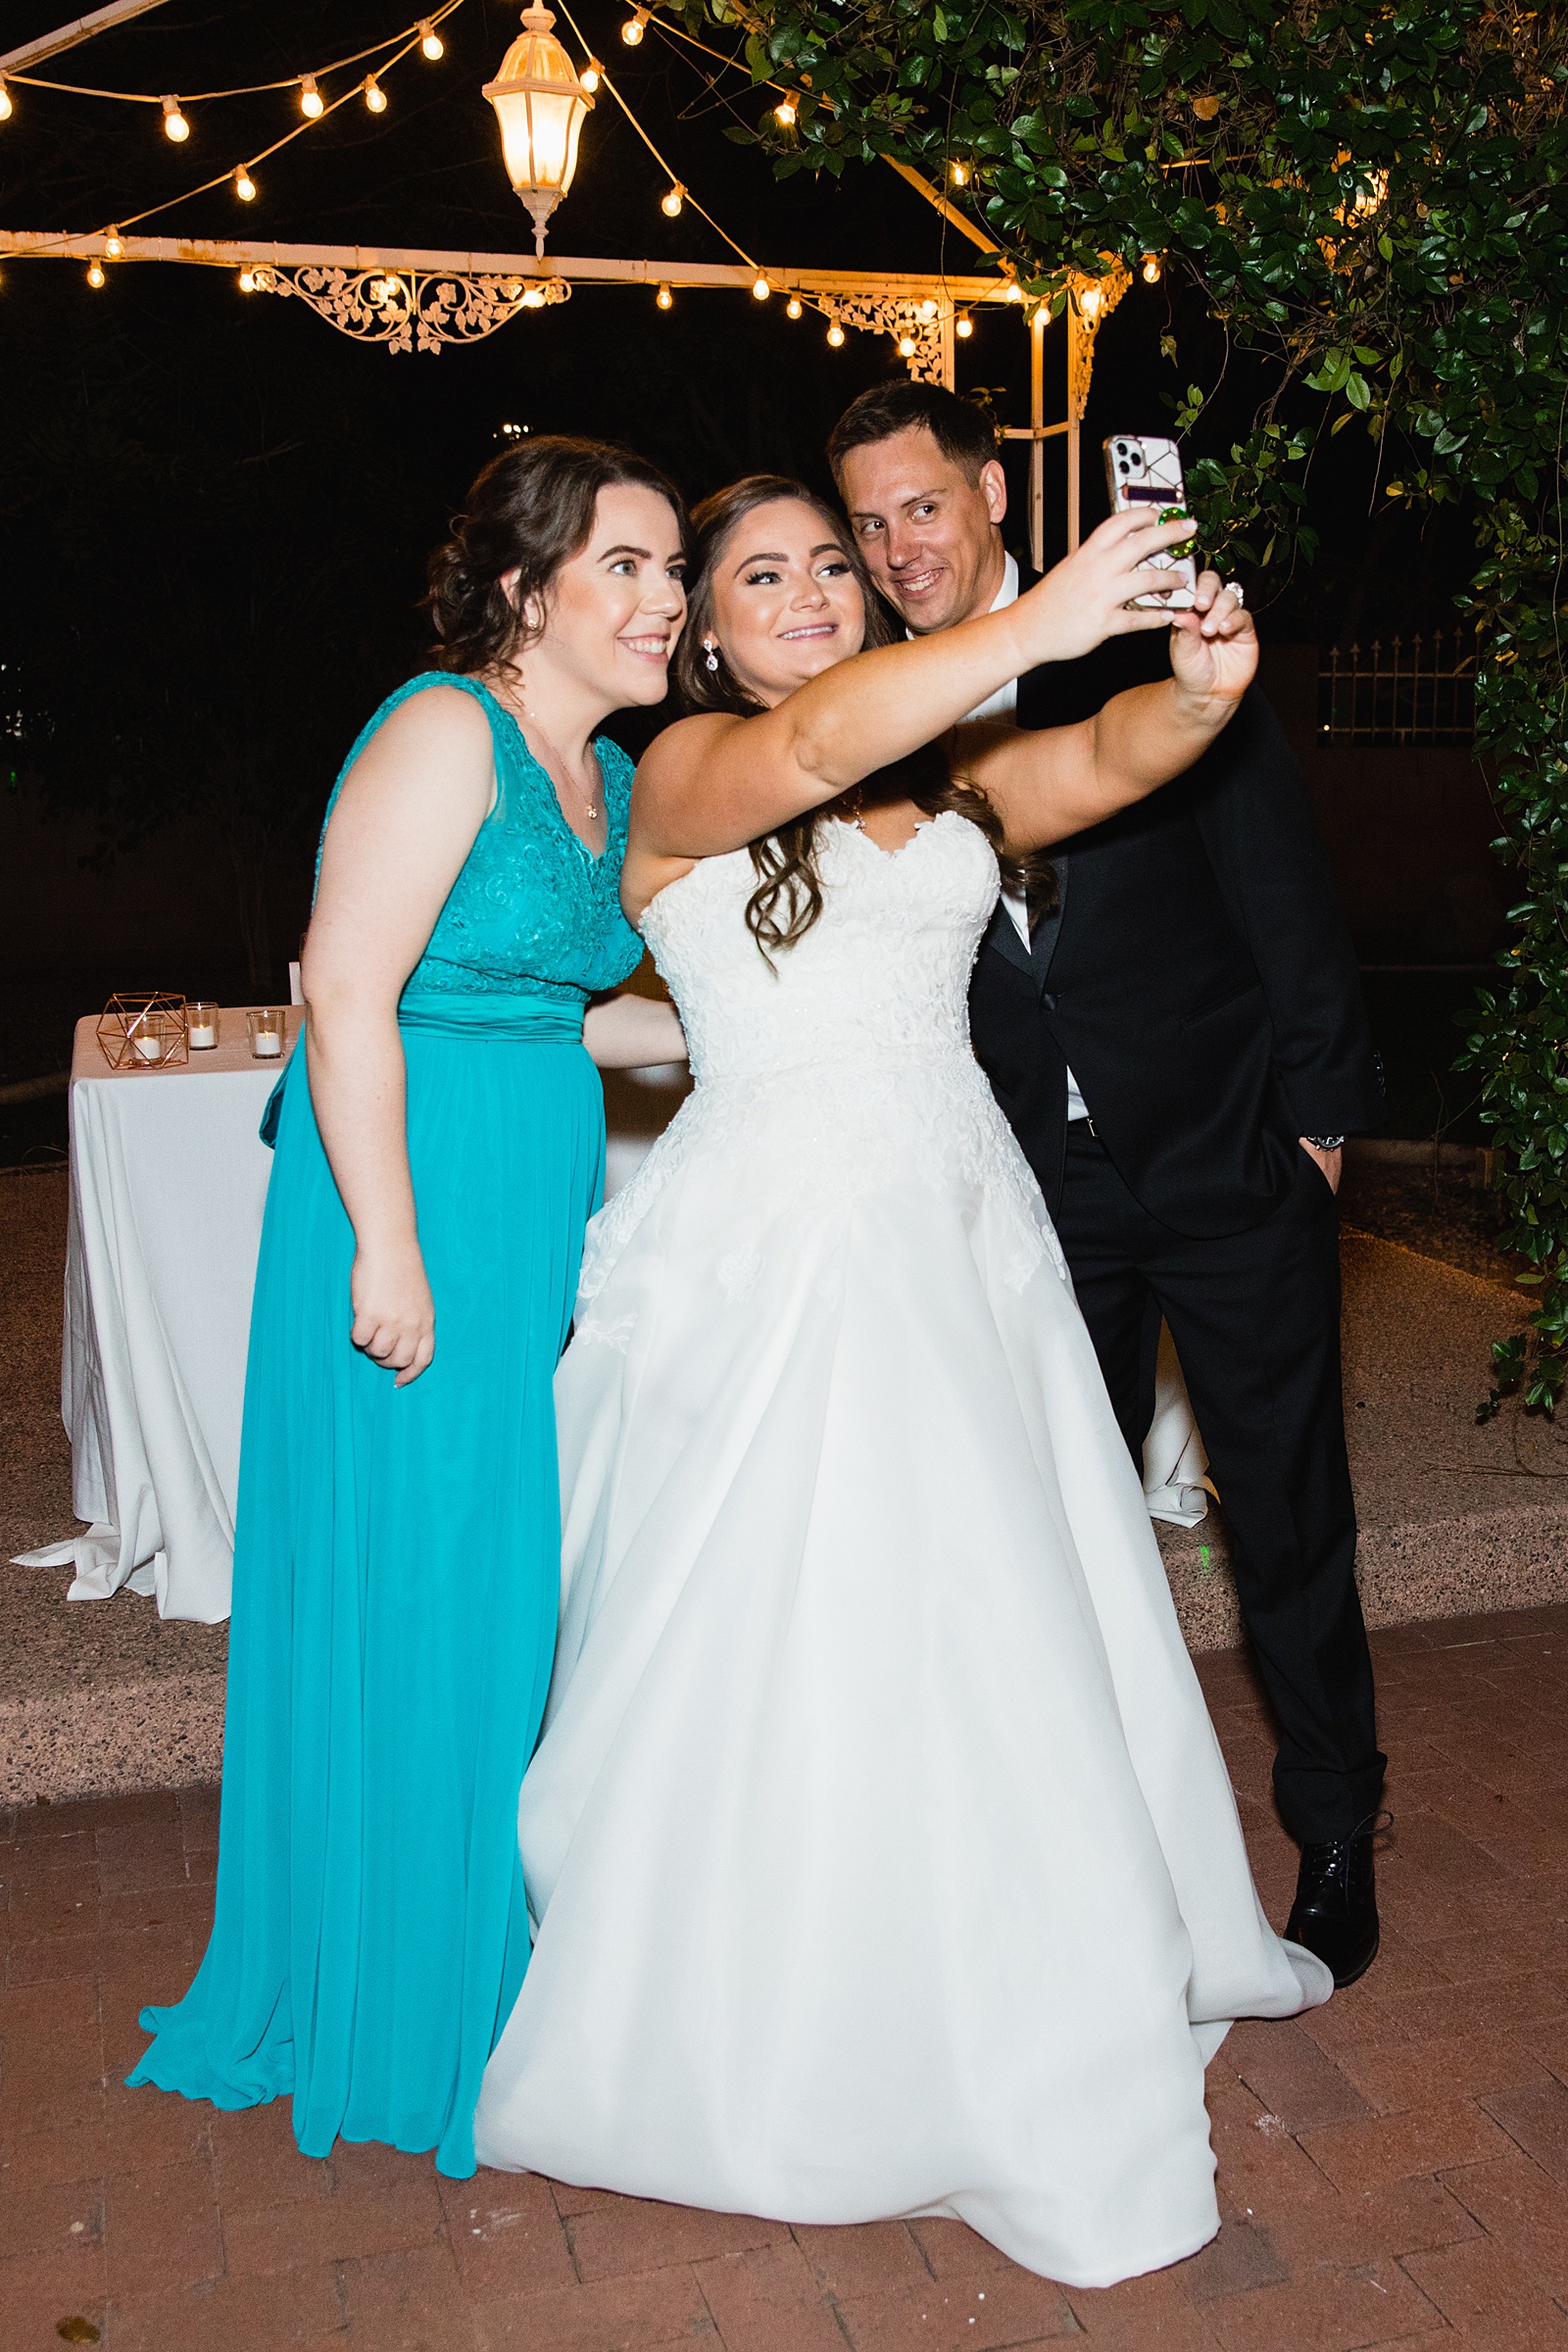 Bride taking a selfie with her groom and bridesmaid by Phoenix wedding photographer PMA Photography.